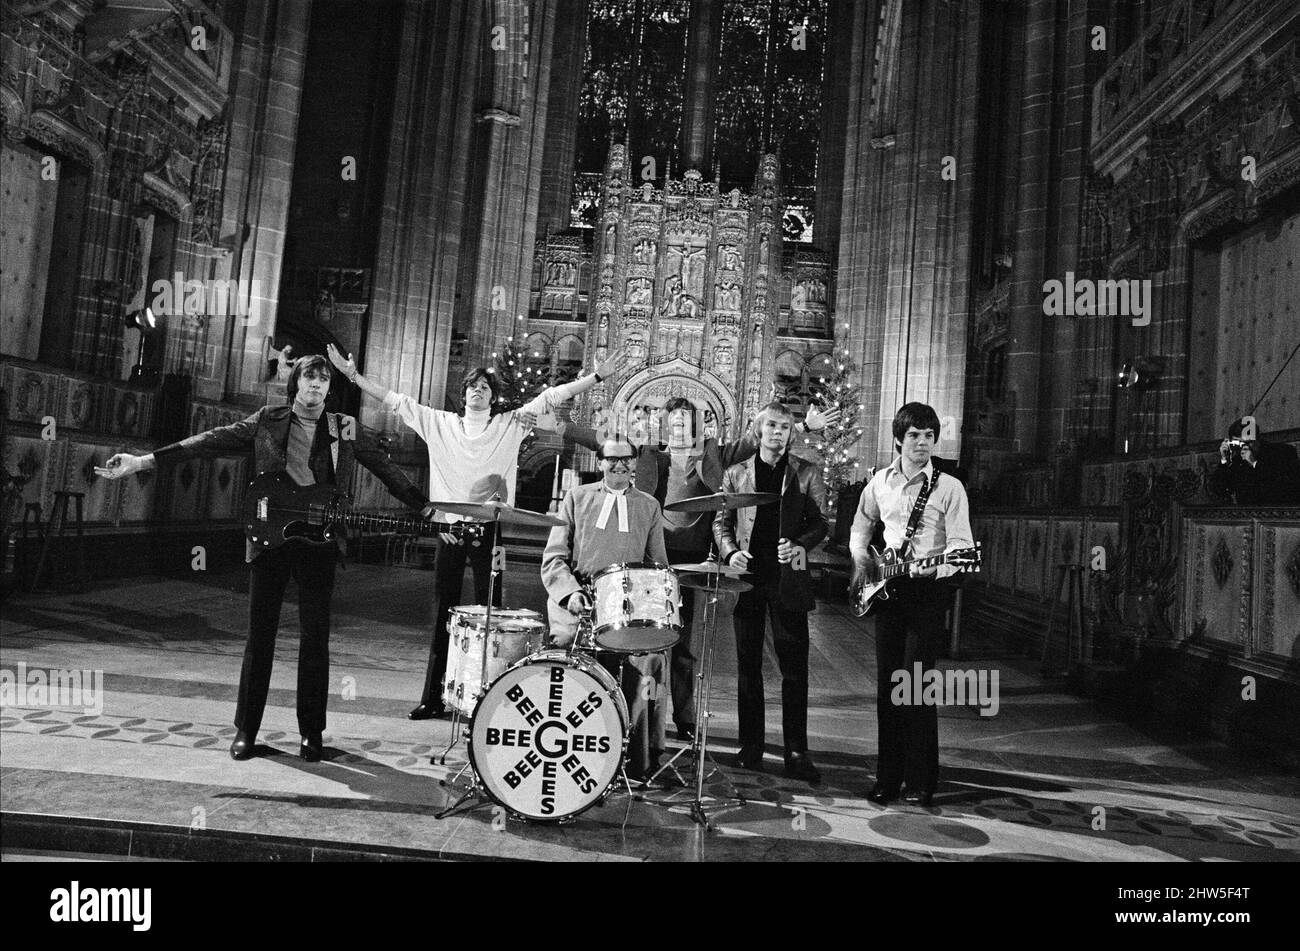 The Bee Gees perform at Liverpool Anglican Cathedral. The Bee Gees are brothers Maurice, Barry and Robin Gibb, Colin Peterson and Vince Malouney. The Dean of Liverpool, Rev. Edward Patey could not resist trying out the drums. 14th December 1967. Stock Photo